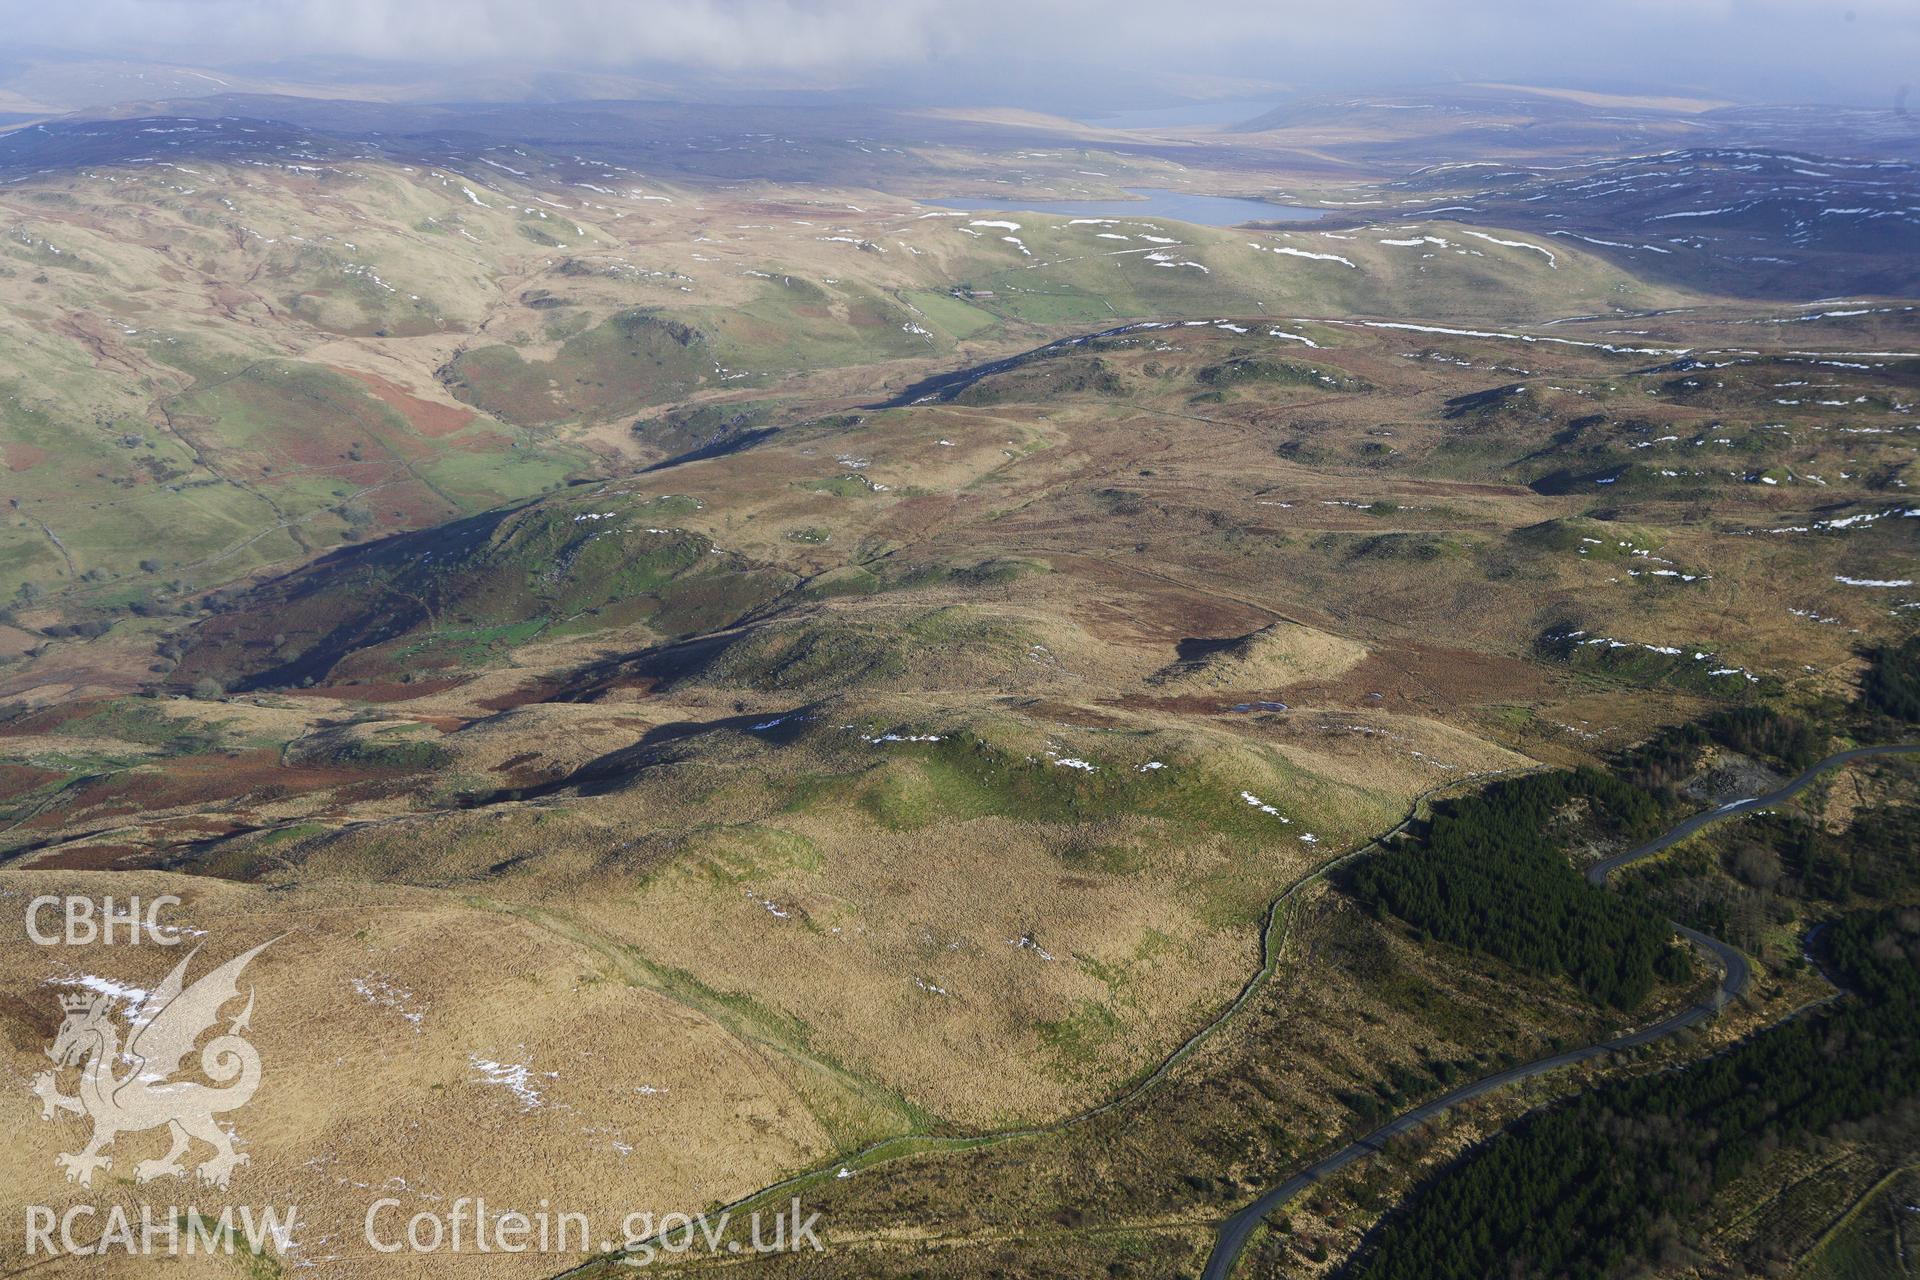 RCAHMW colour oblique photograph of Hafod Eidos Rural Settlement, long view. Taken by Toby Driver on 07/02/2012.